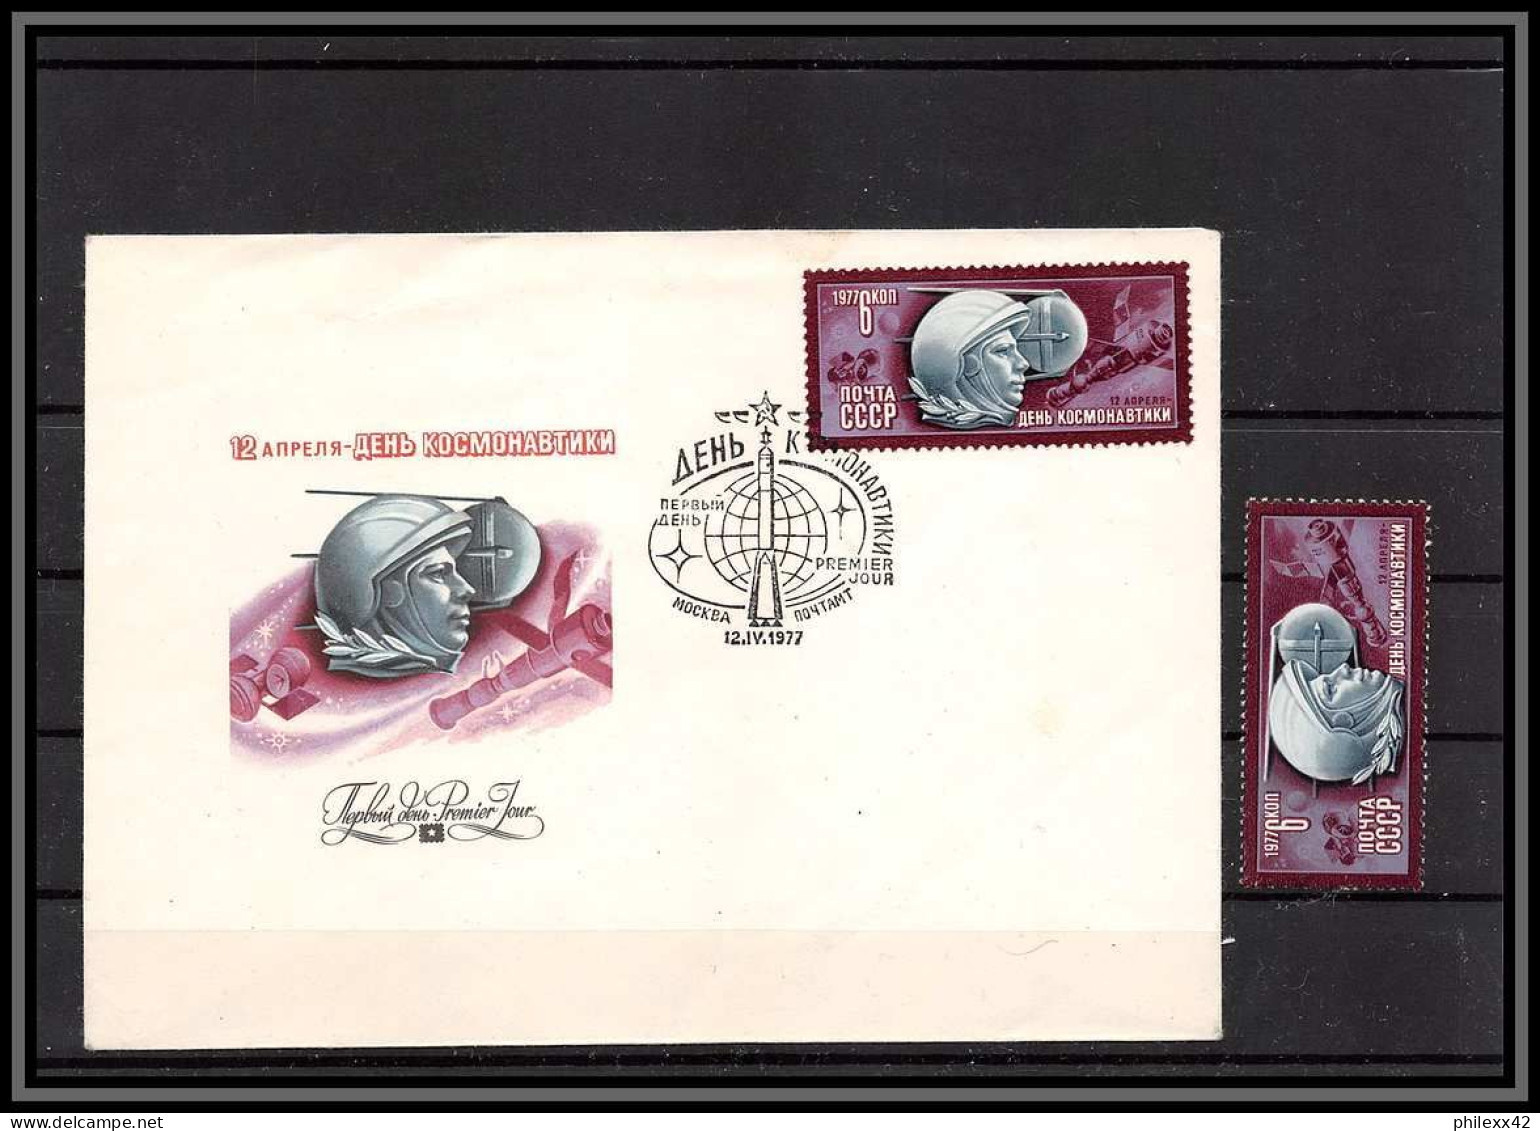 3391 Espace (space) Lettre (cover) Russie (Russia Urss USSR) 4363 Fdc + Mnh ** Cosmonauts Day Gagarine Gagarin 12/4/1977 - Rusland En USSR